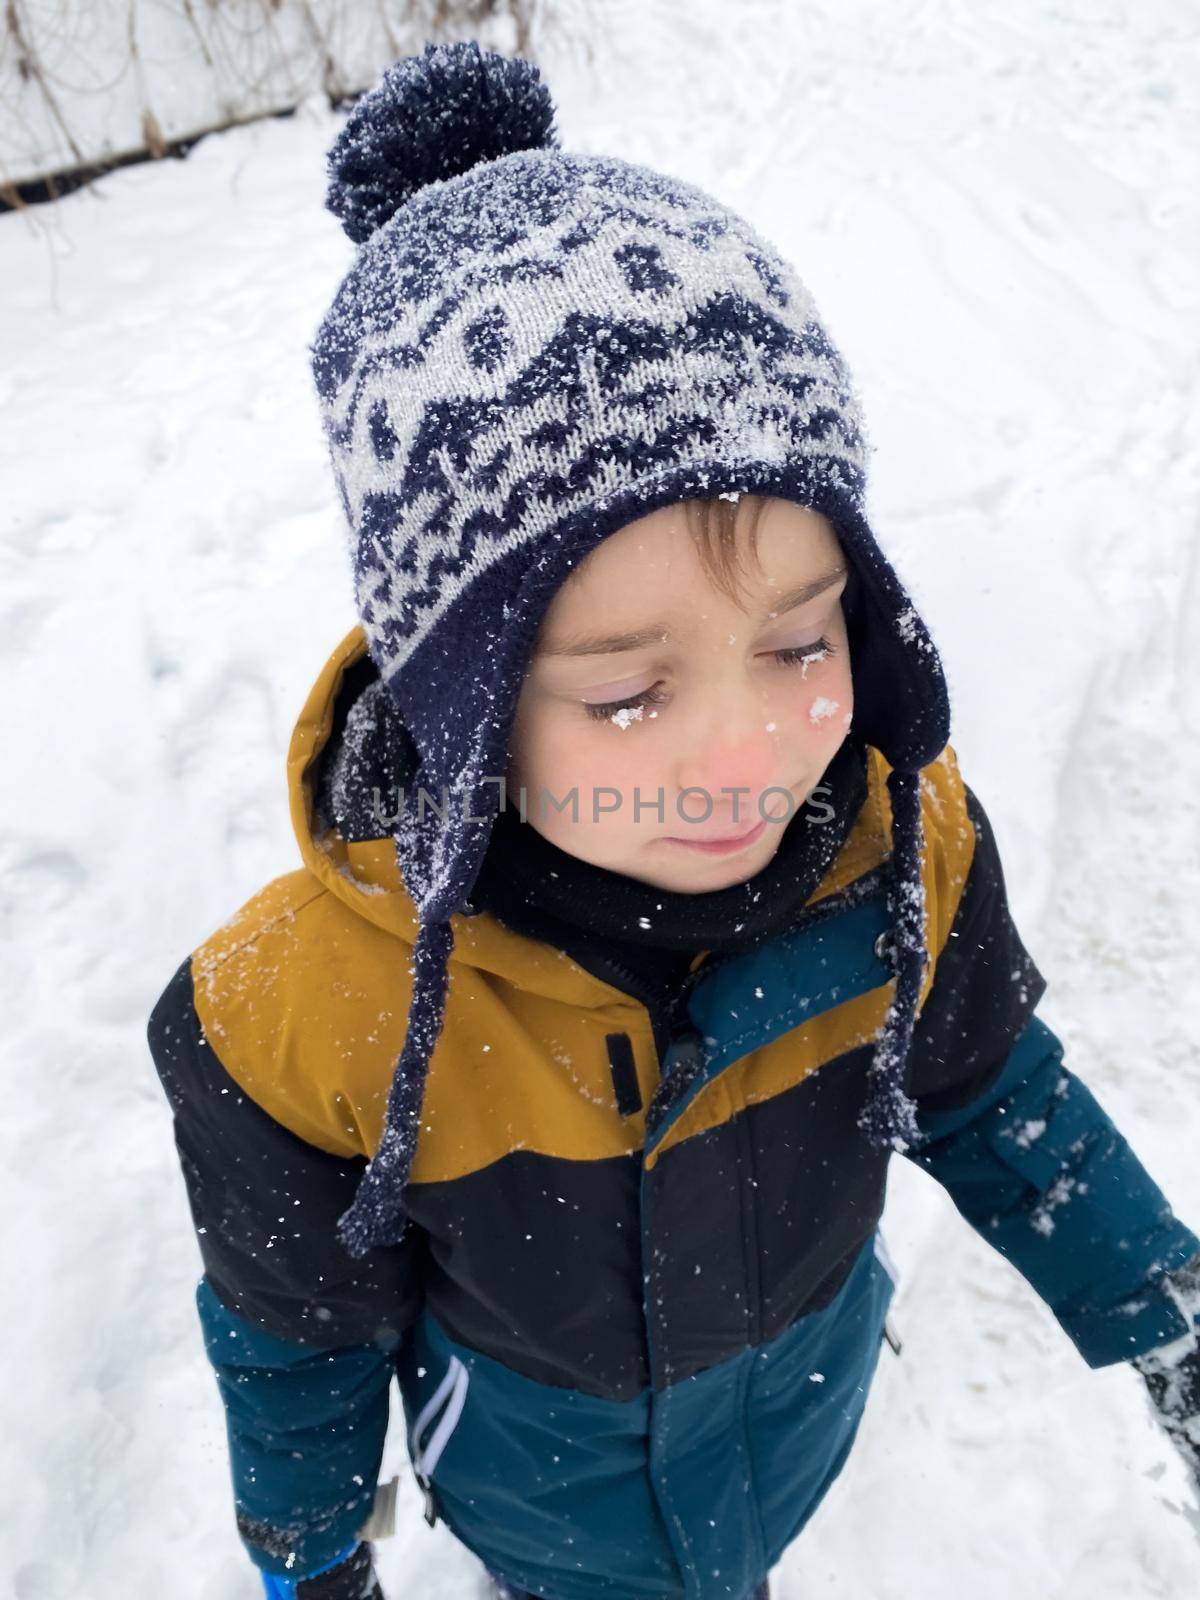 Portrait of a happy five year old boy in the snow in winter. Snowflakes on the hat and eyelashes